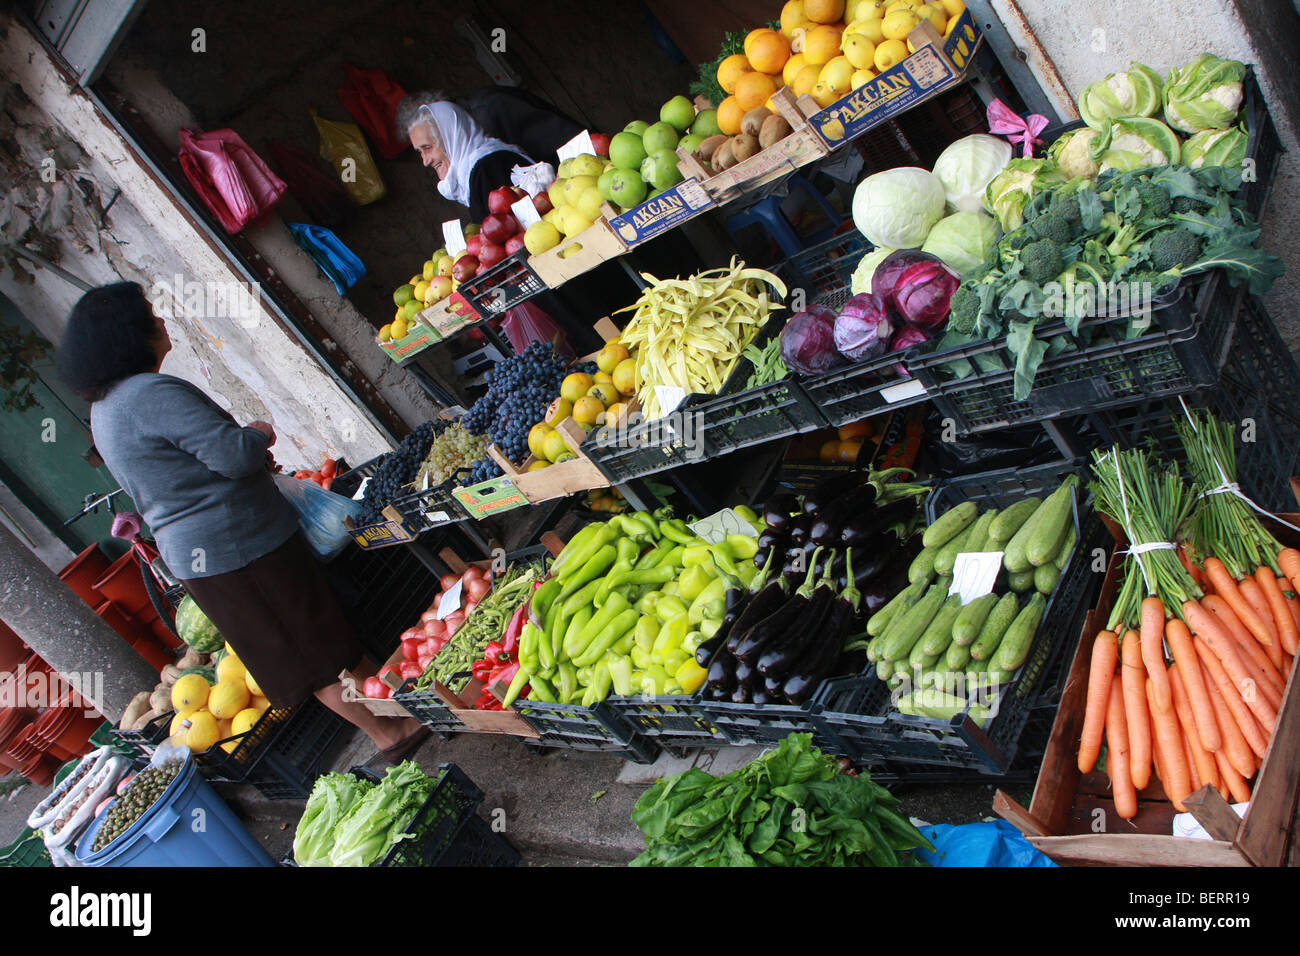 Fruit & vegetable stall in the market area of the Avni Rustemi district of Tirana, Albania Stock Photo